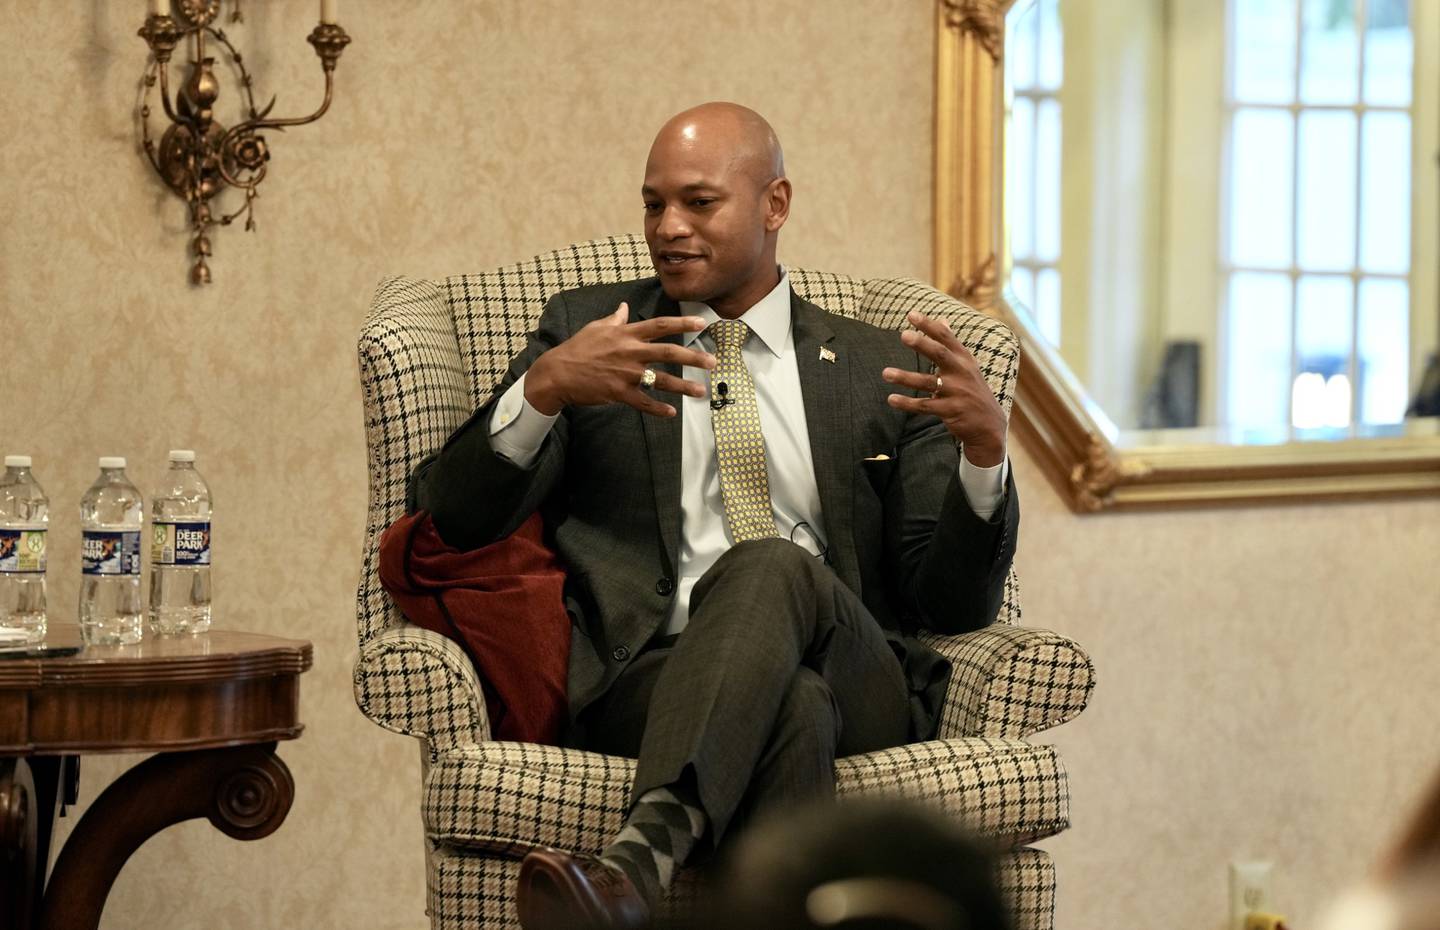 Gov.-elect Wes Moore, shown speaking in Annapolis on Wednesday, named additional members of his cabinet. (Kaitlin Newman/The Baltimore Banner)